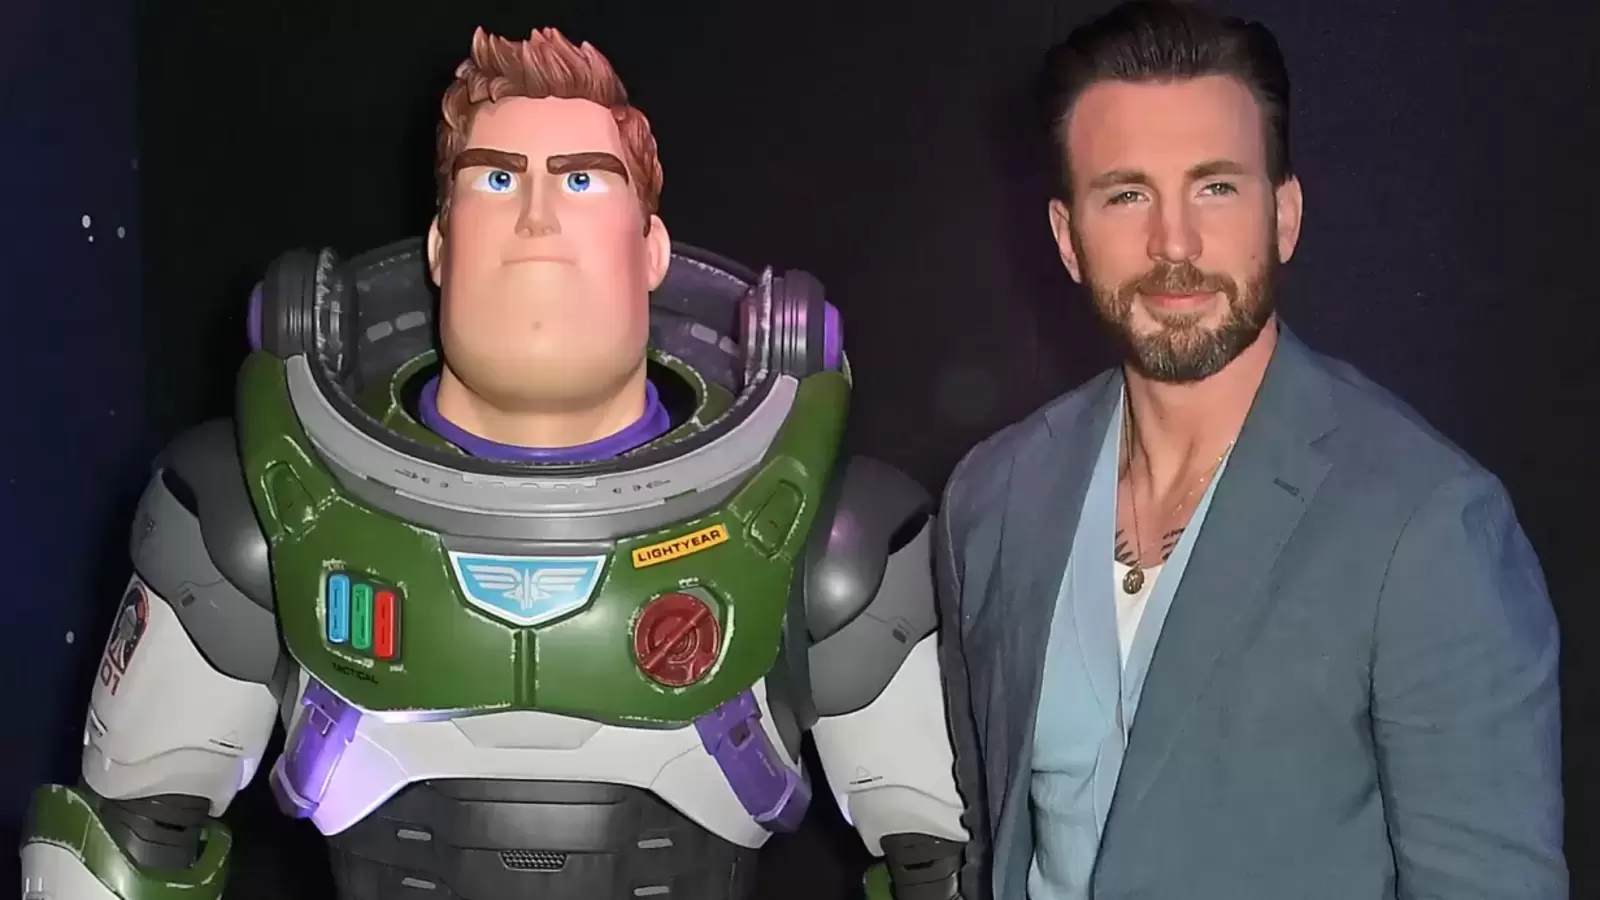 Xxx Cartoon Gujarati Video - Chris Evans says people being offended by Lightyear's same-sex kiss are  'idiots' | Hollywood - Hindustan Times